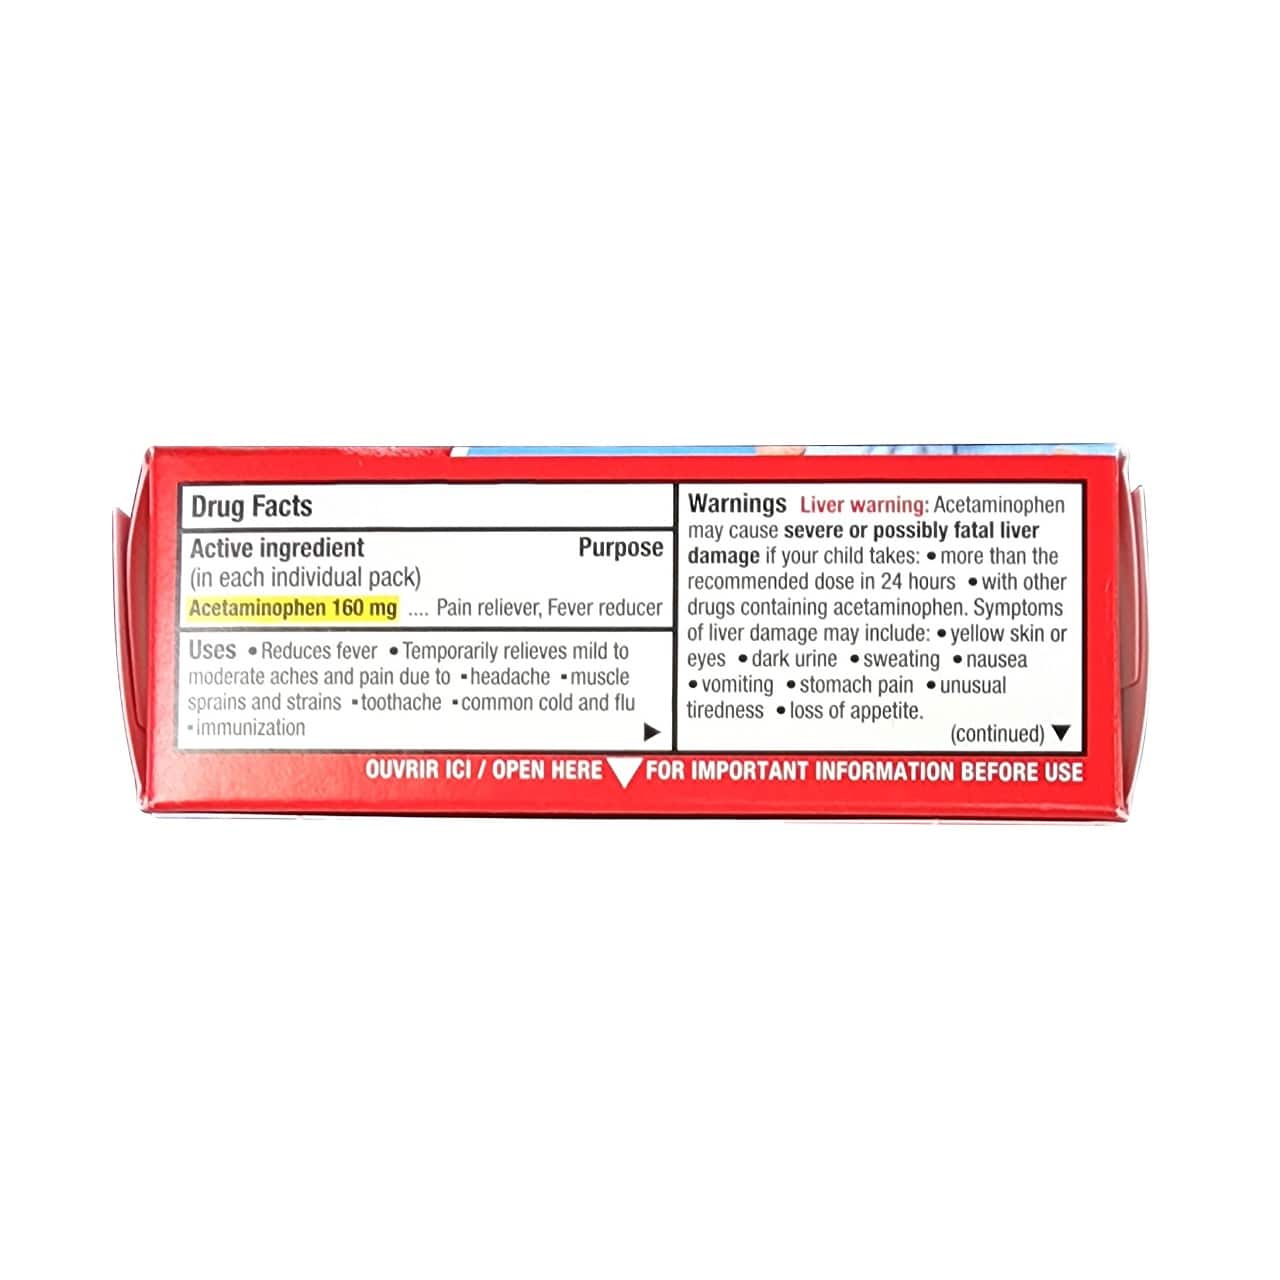 Ingredients, uses, and warnings for Children's Tylenol Easy Dissolve Acetaminophen Powder Wild Berry Flavour (Ages 6 - 11) (16 sachets) in English